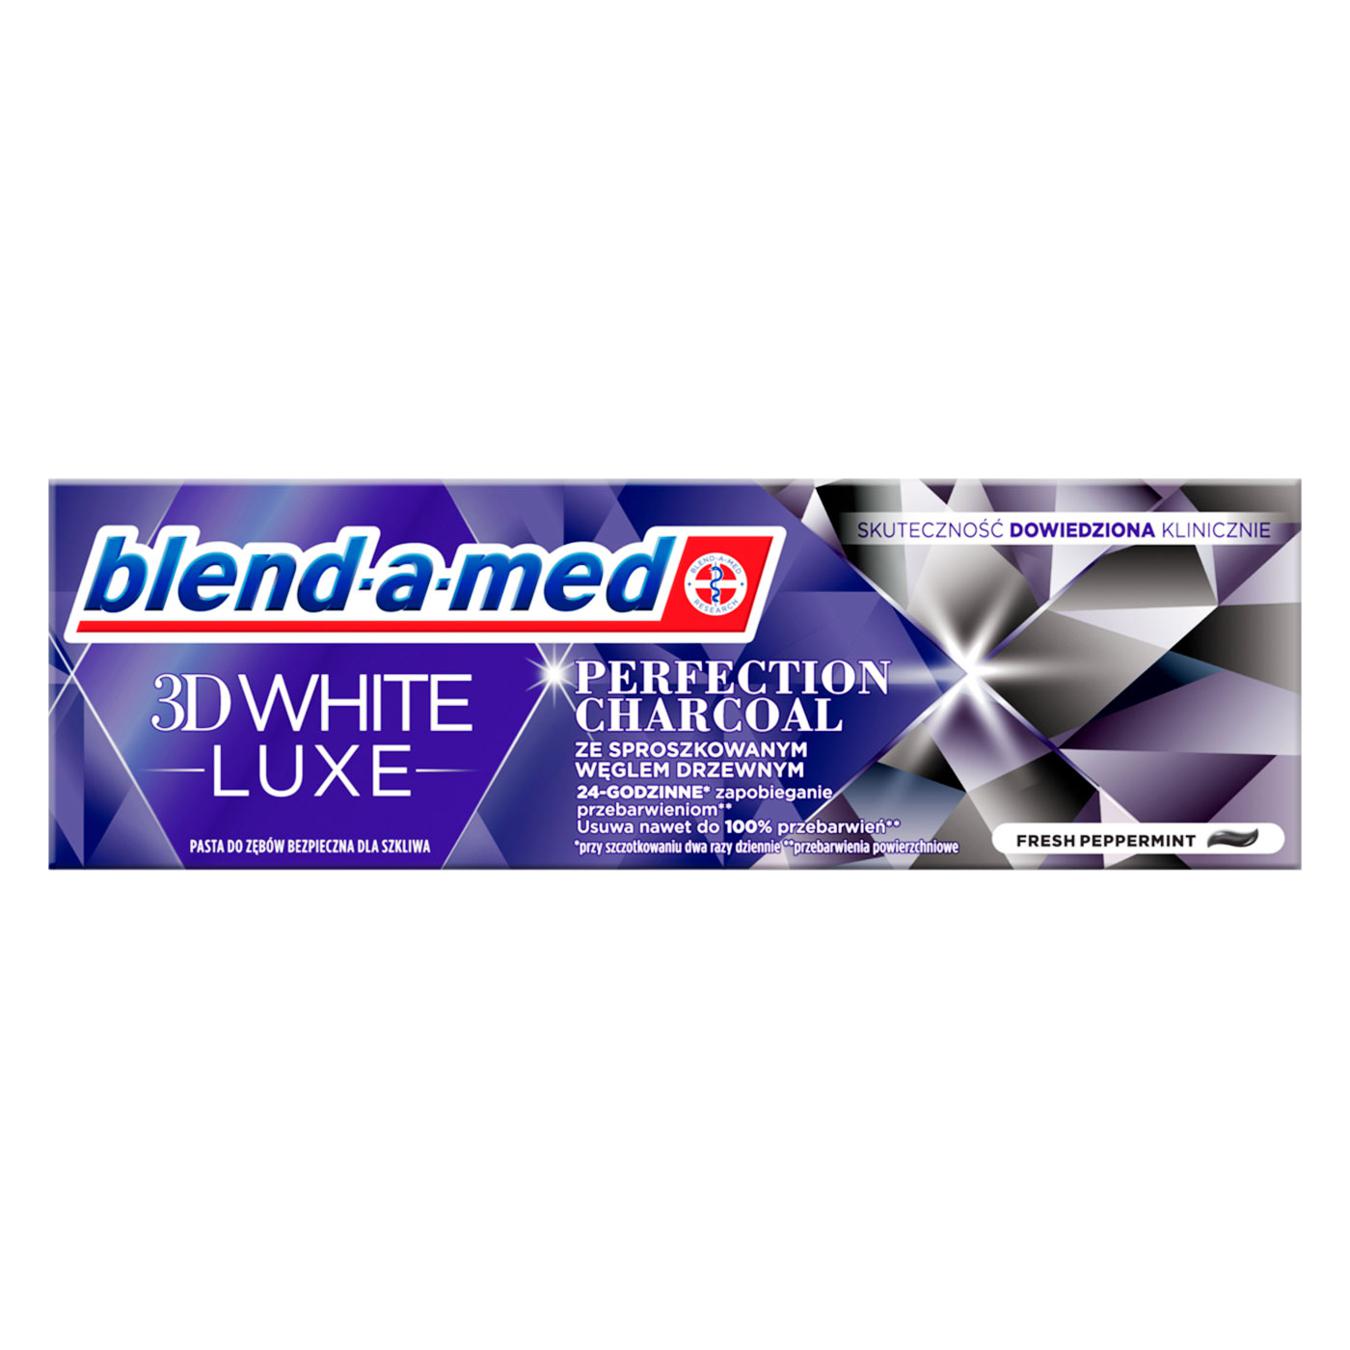 Toothpaste Blend-a-Med 3D White luxe coal perfection with coal powder 75ml